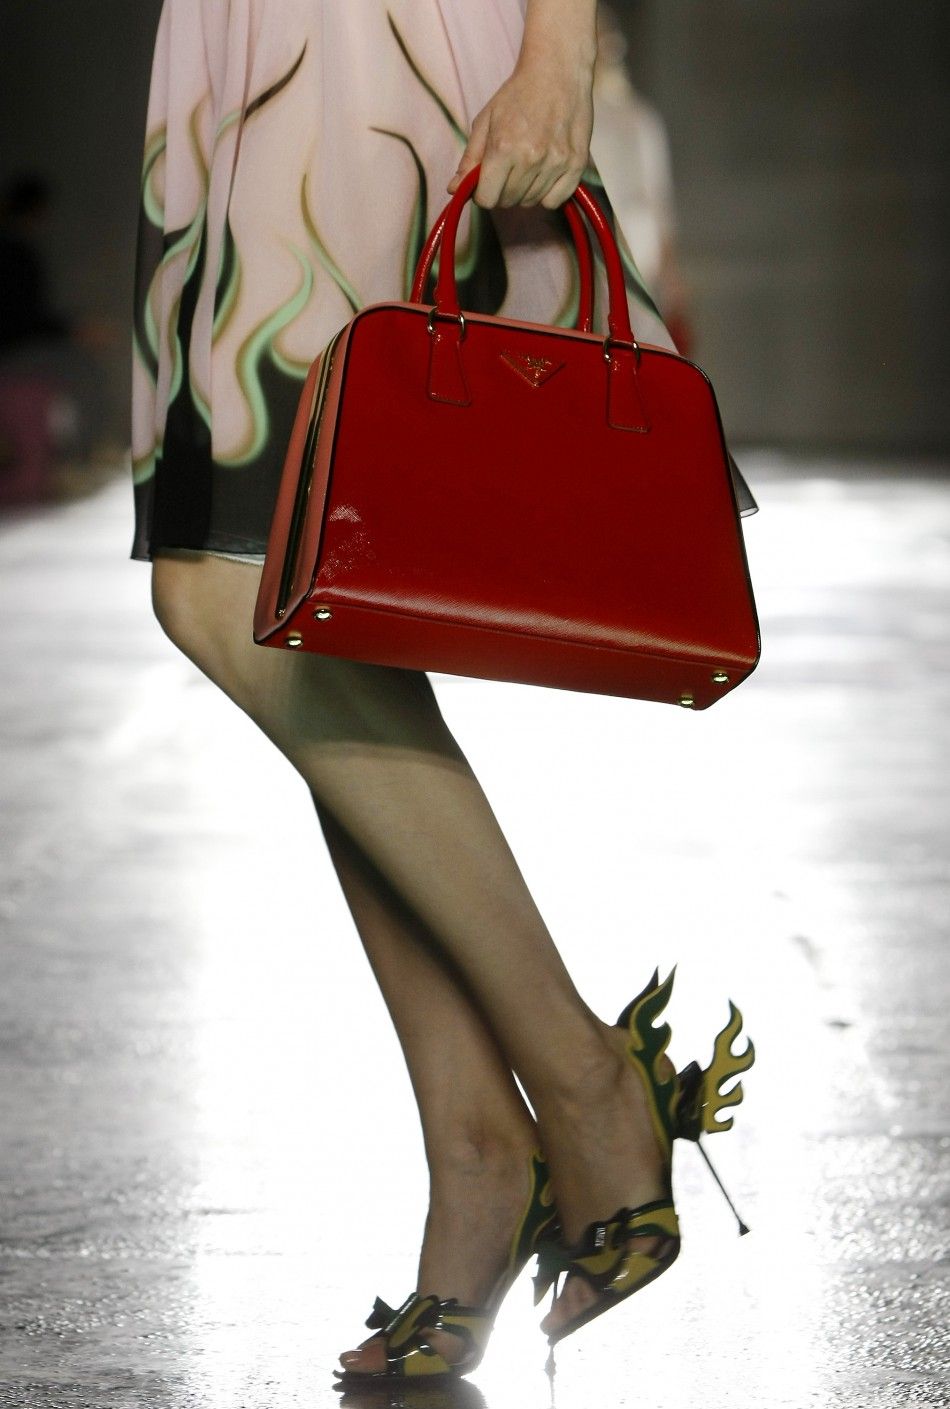 Unique Footwear Trends at the 2011 Milan Fashion Show.